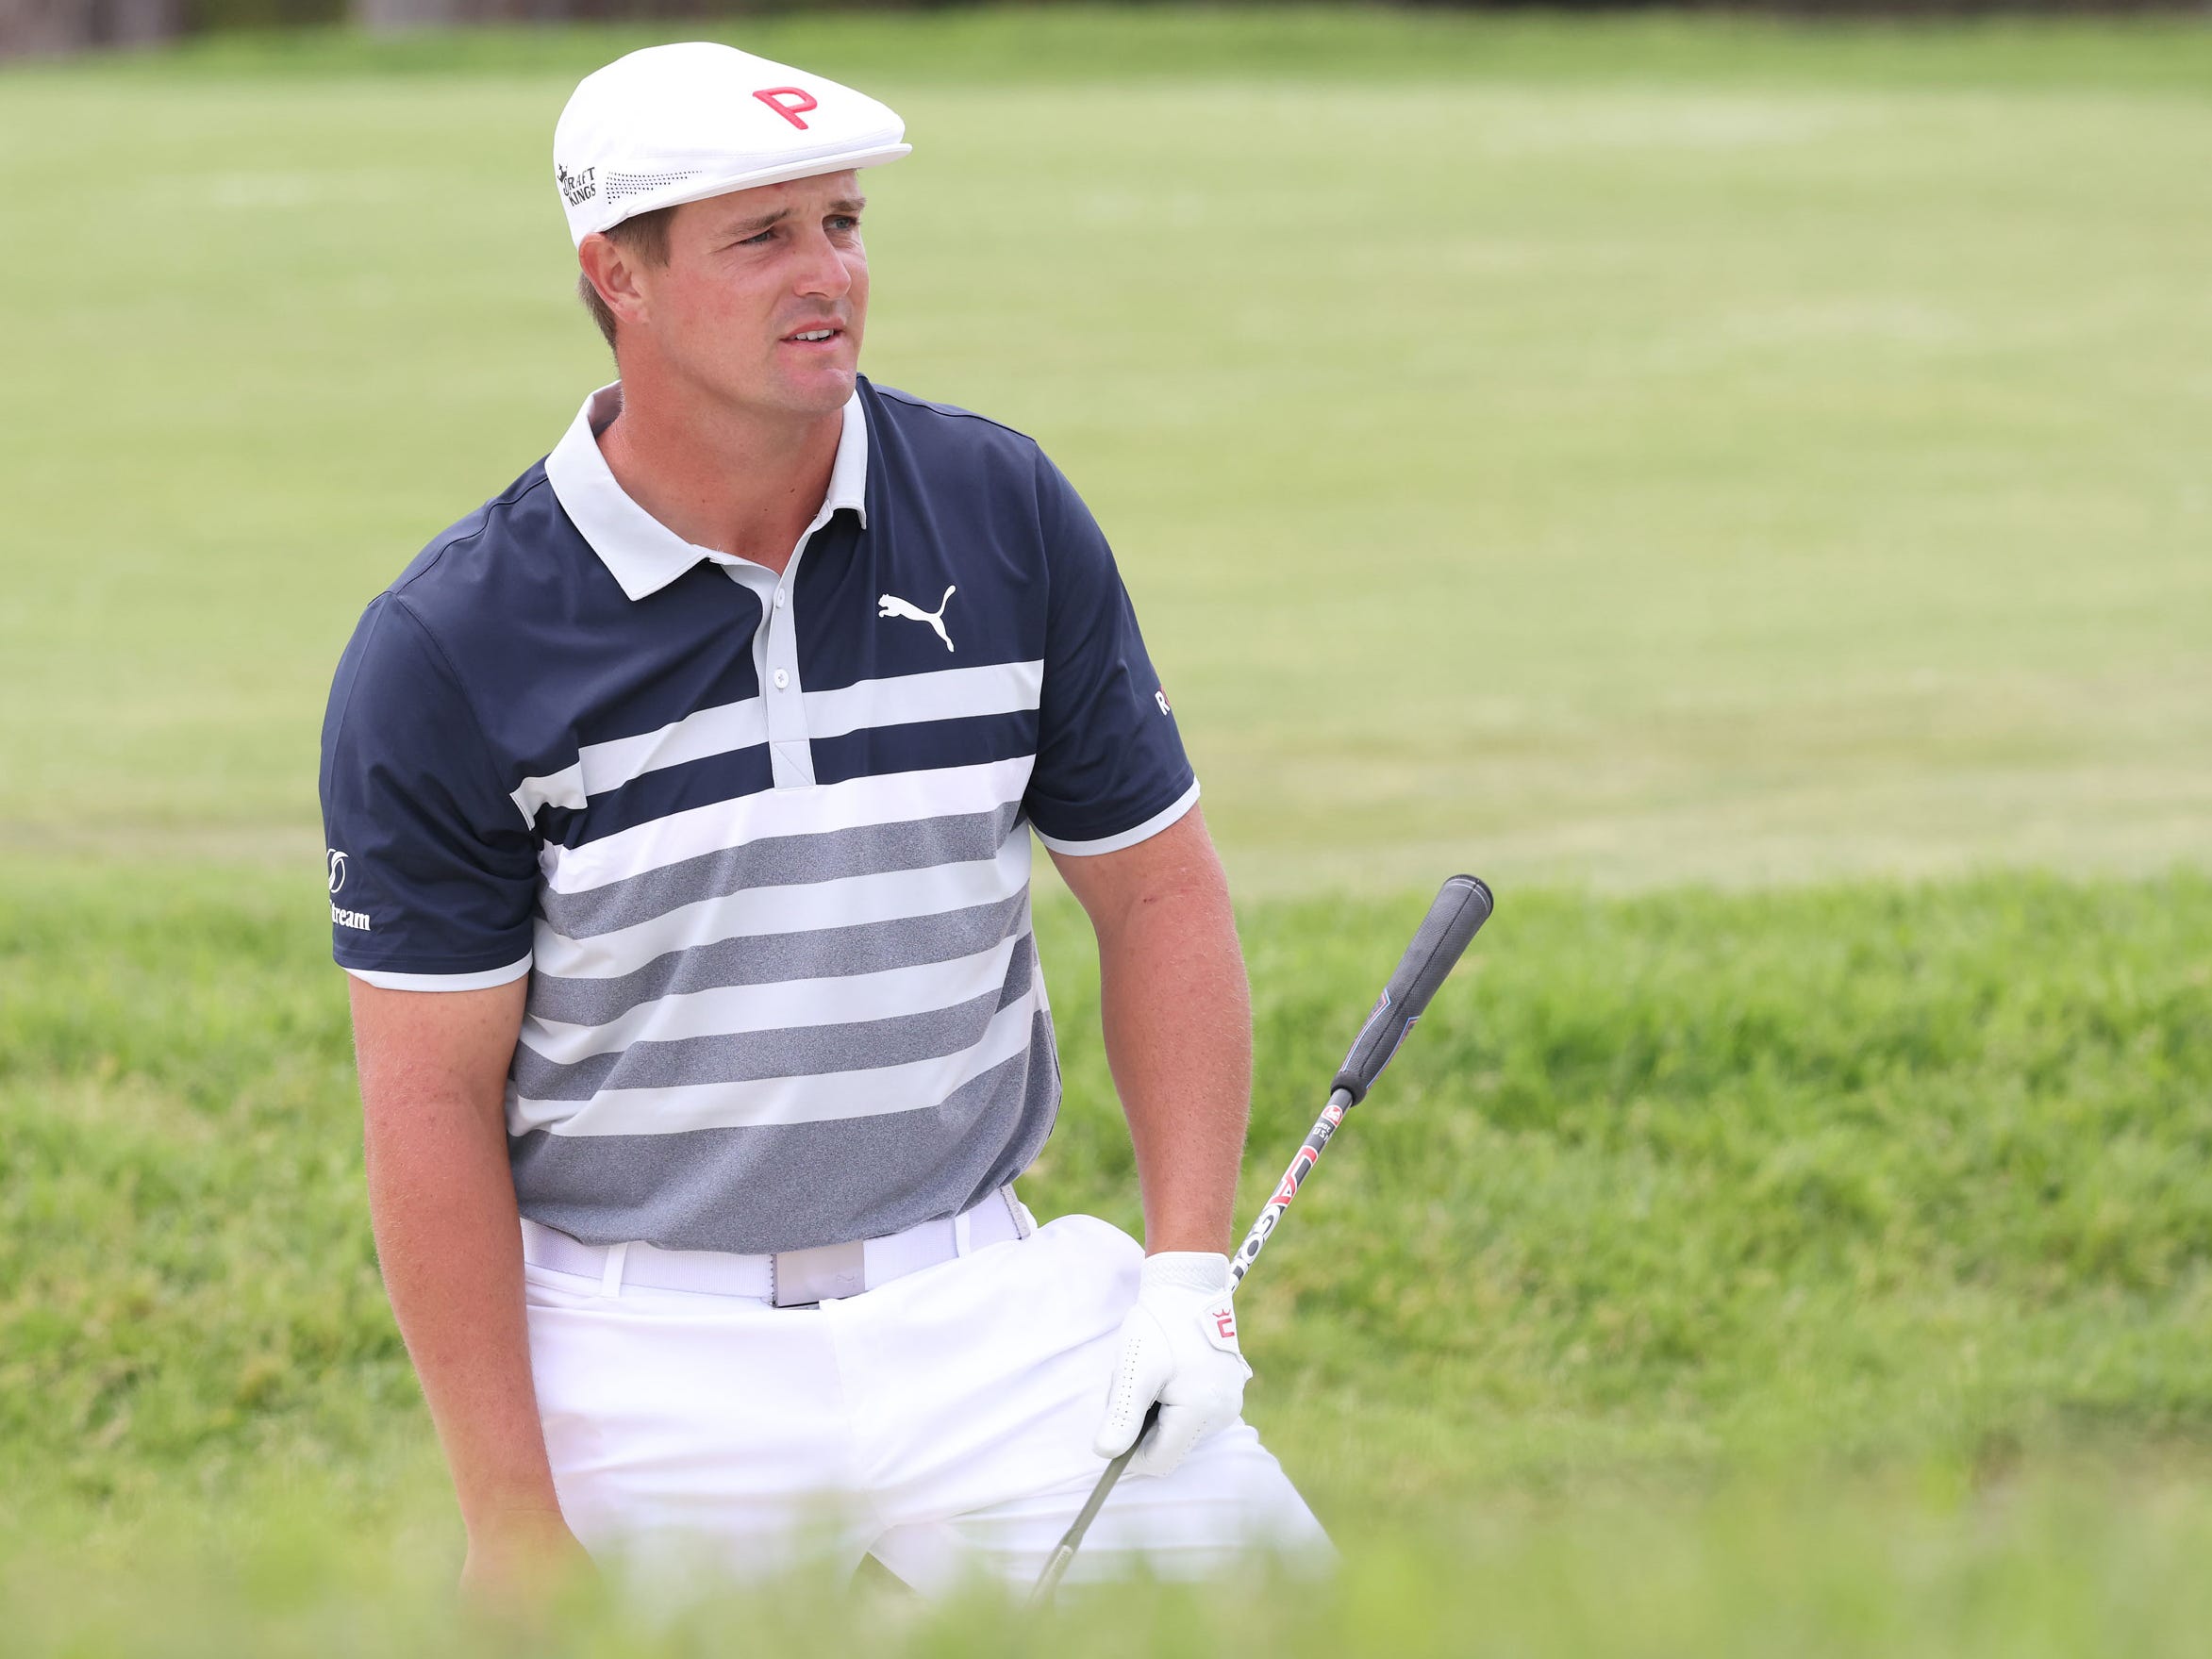 Bryson DeChambeau reacts after a shot at the 2021 US Open.